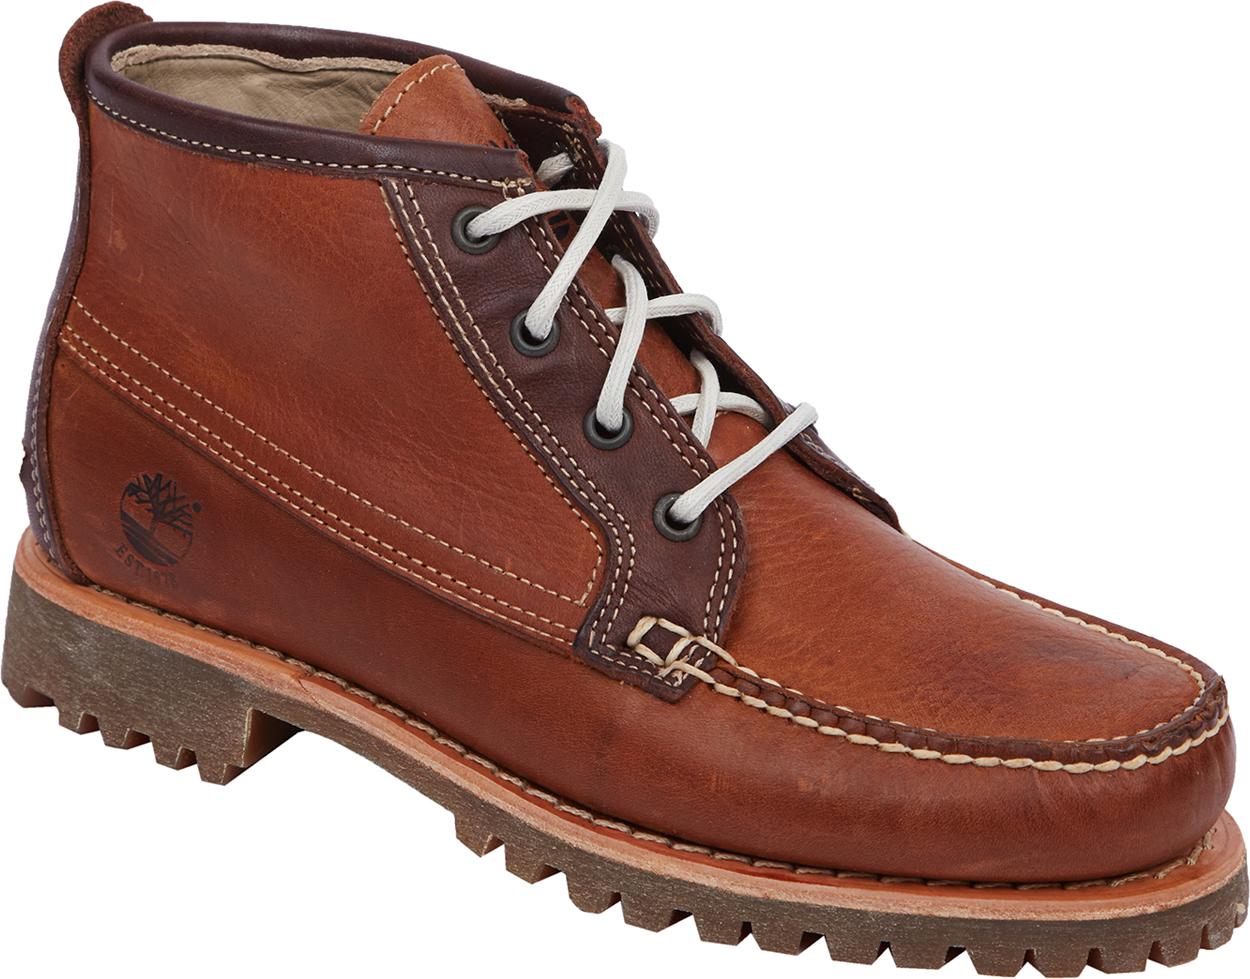 Lyst - Timberland Authentic Chukka Boot in Brown for Men